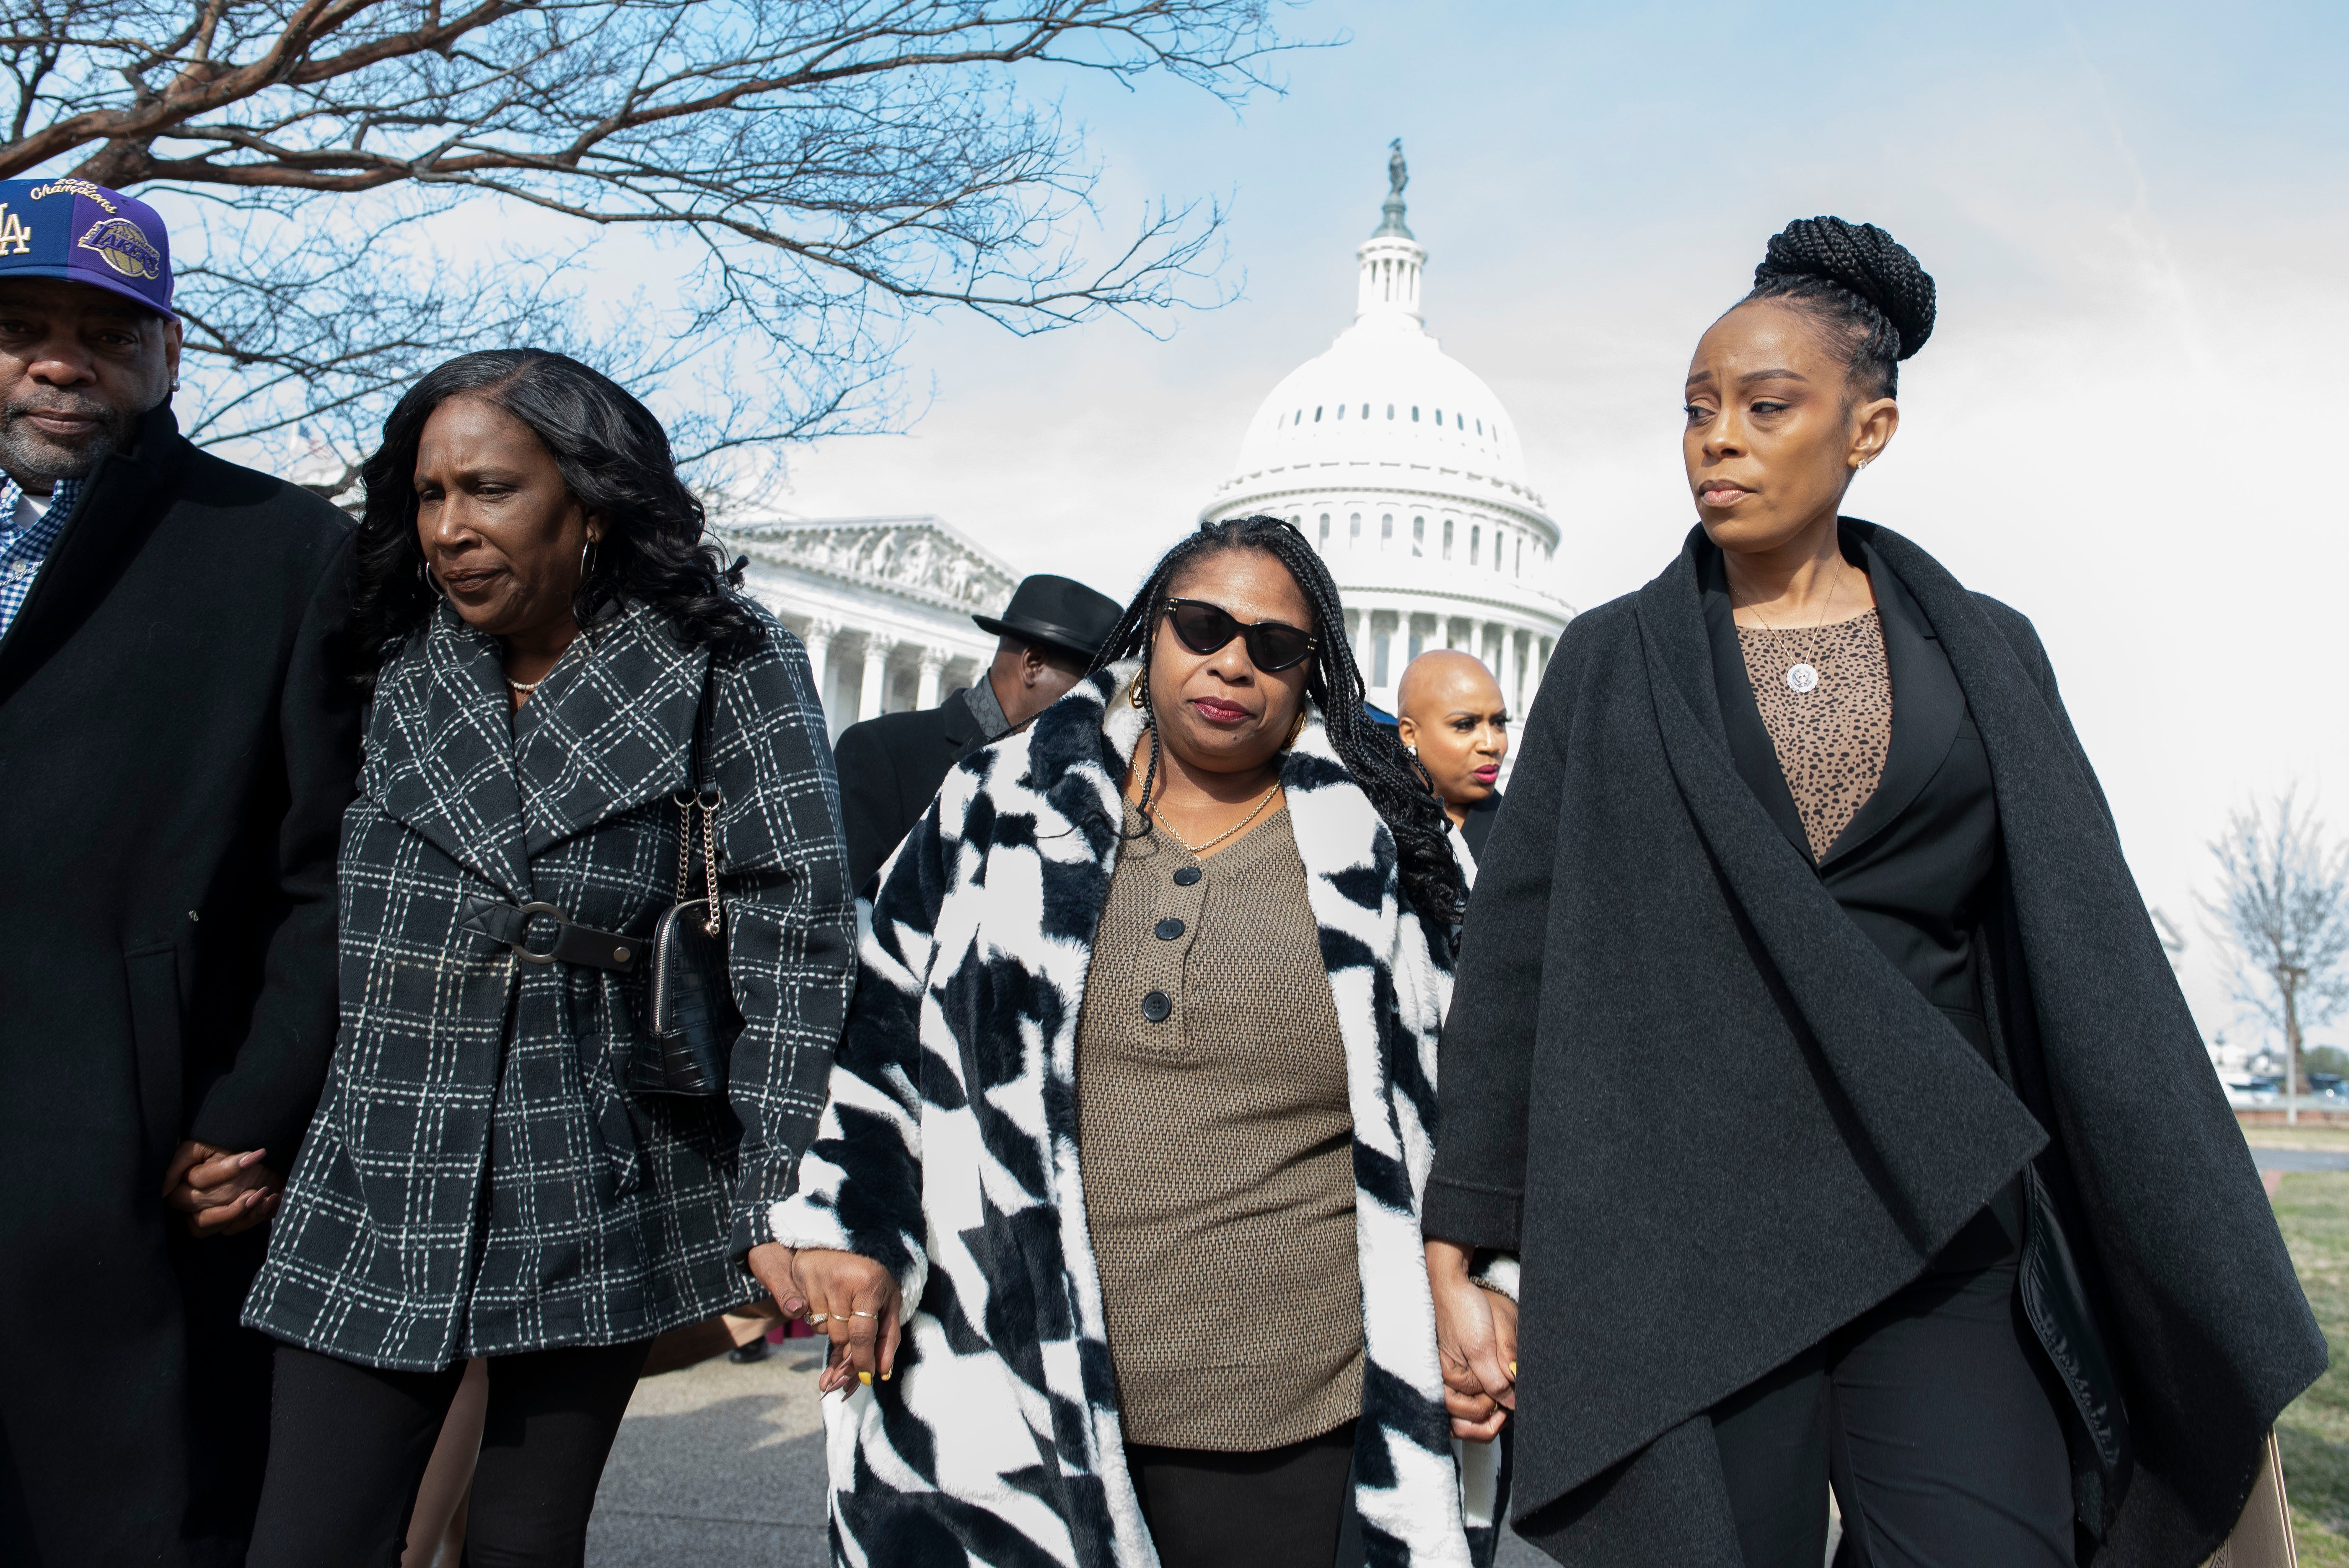 RowVaughn Wells, left, mother of Tyre Nichols, and Samaria Rice, the mother of Tamir Rice, meet with lawmakers in Washington DC on 7 February.